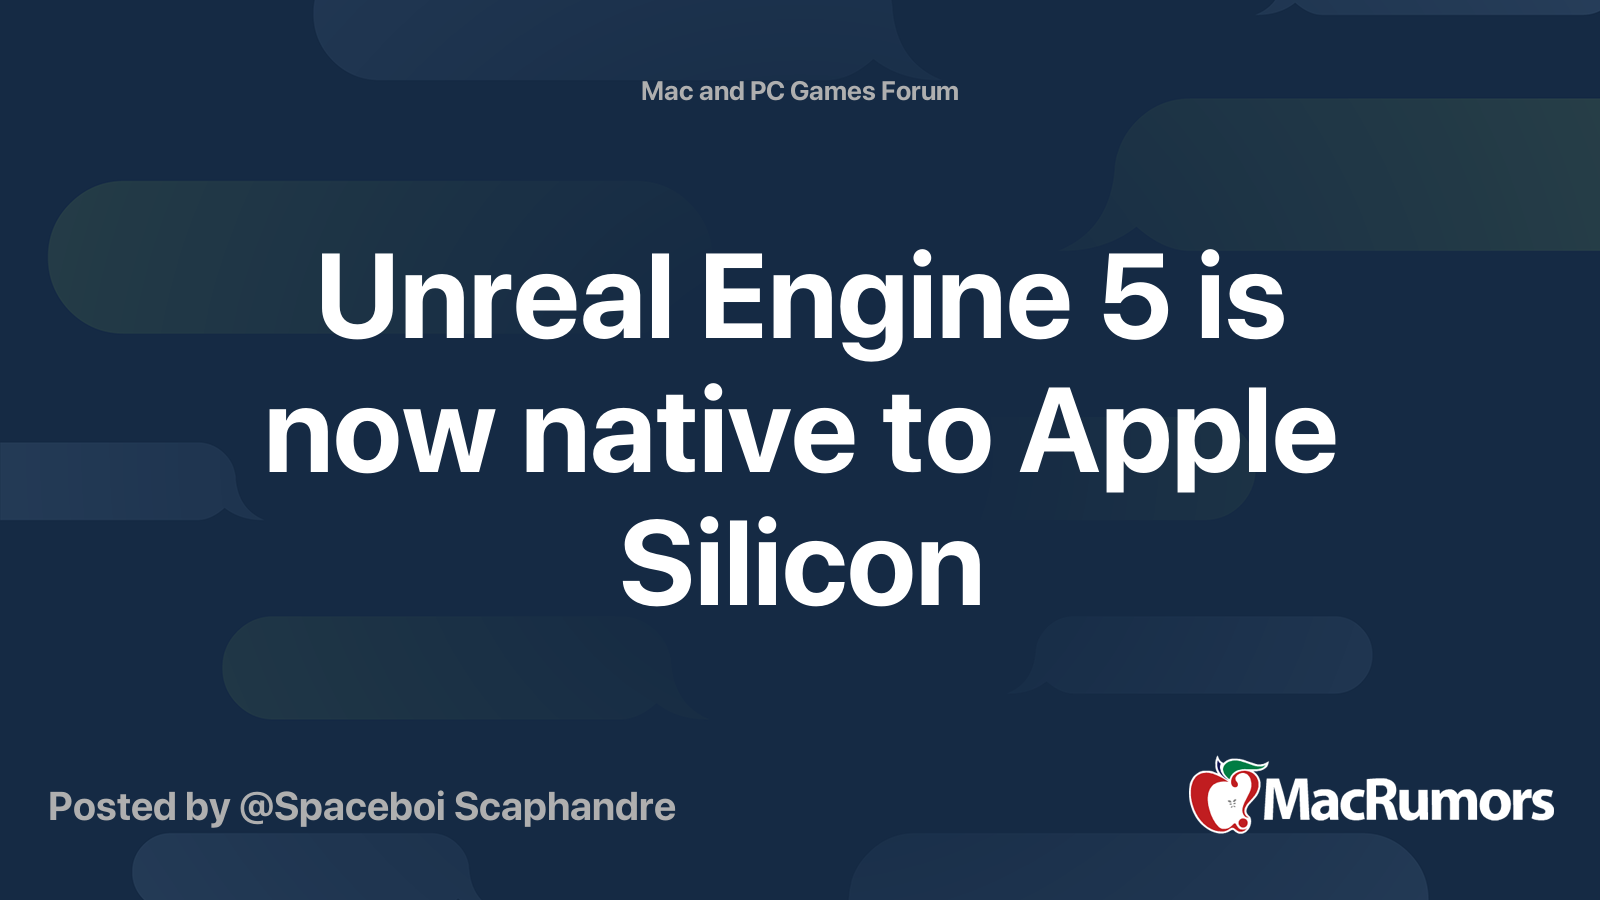 Apple Silicon Macs now natively support Unreal Engine 5